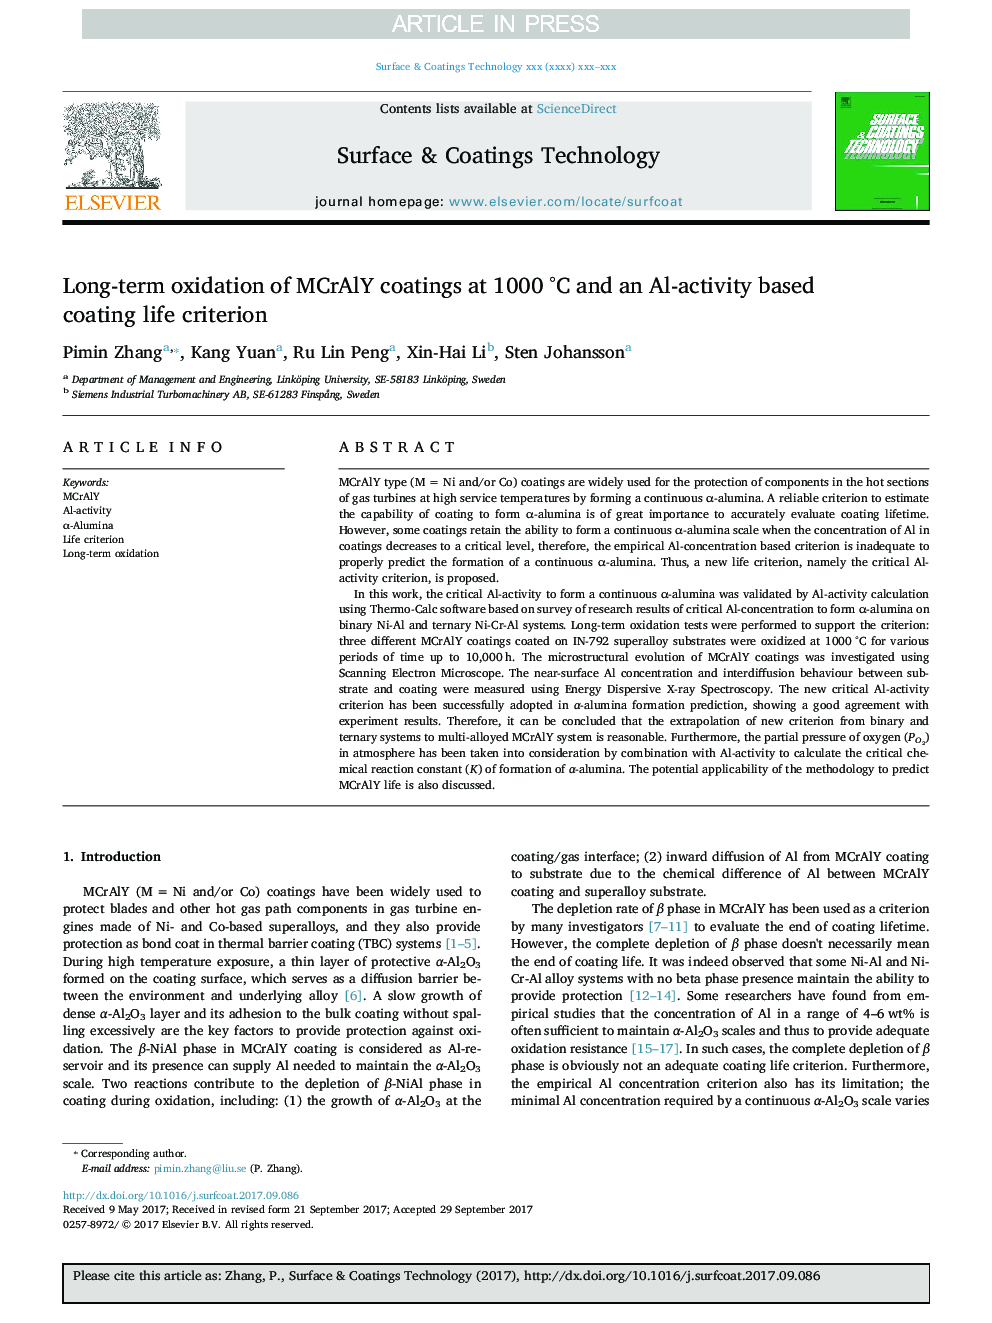 Long-term oxidation of MCrAlY coatings at 1000Â Â°C and an Al-activity based coating life criterion